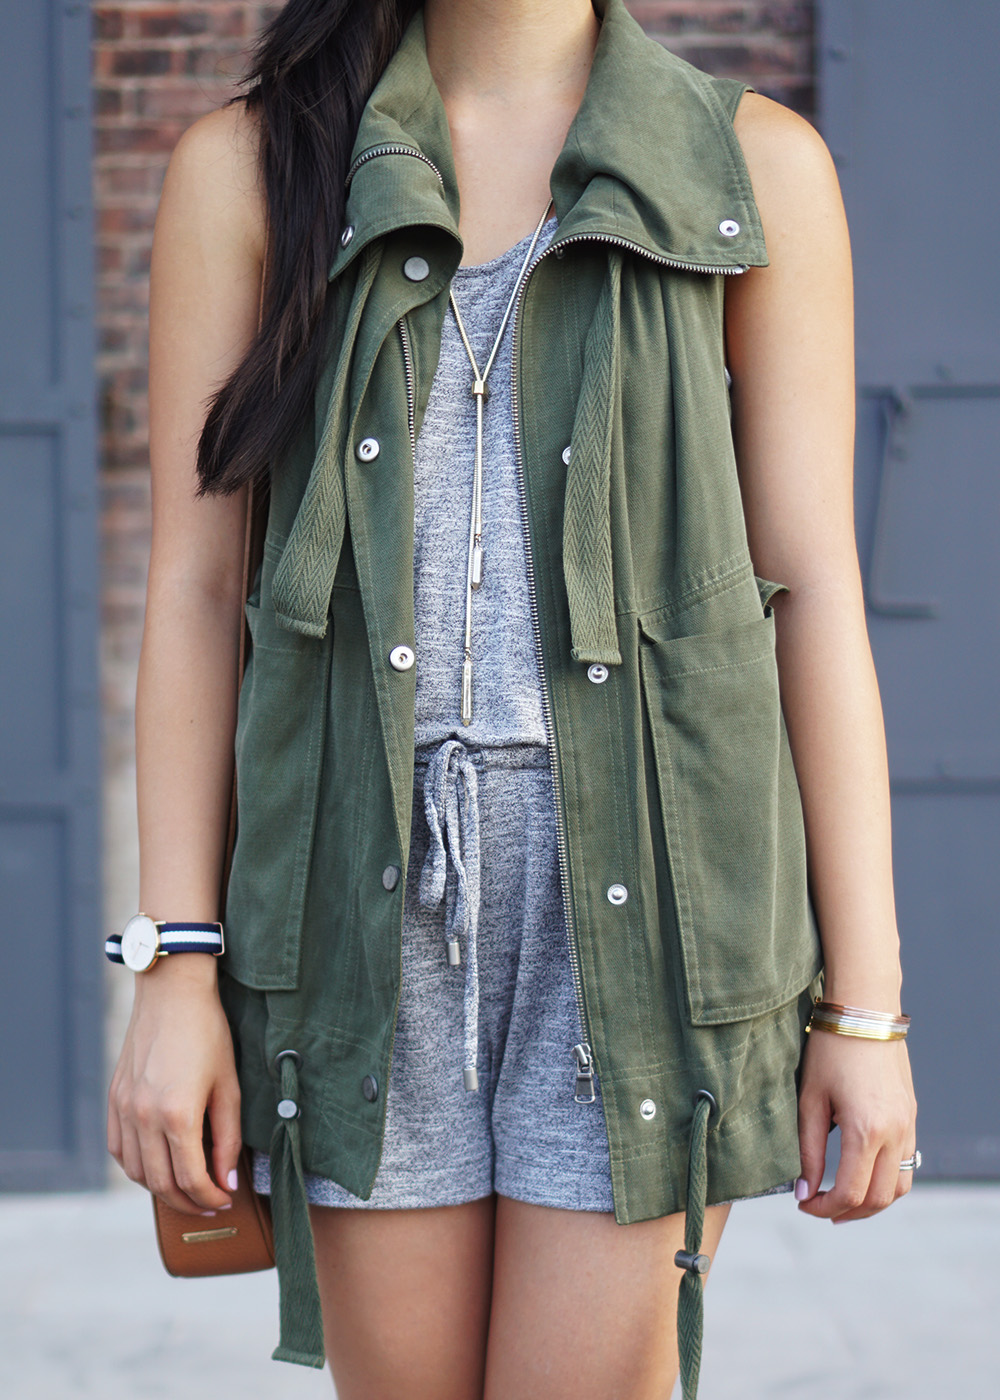 Fall Transition Outfit / Army Green Vest & Grey Romper